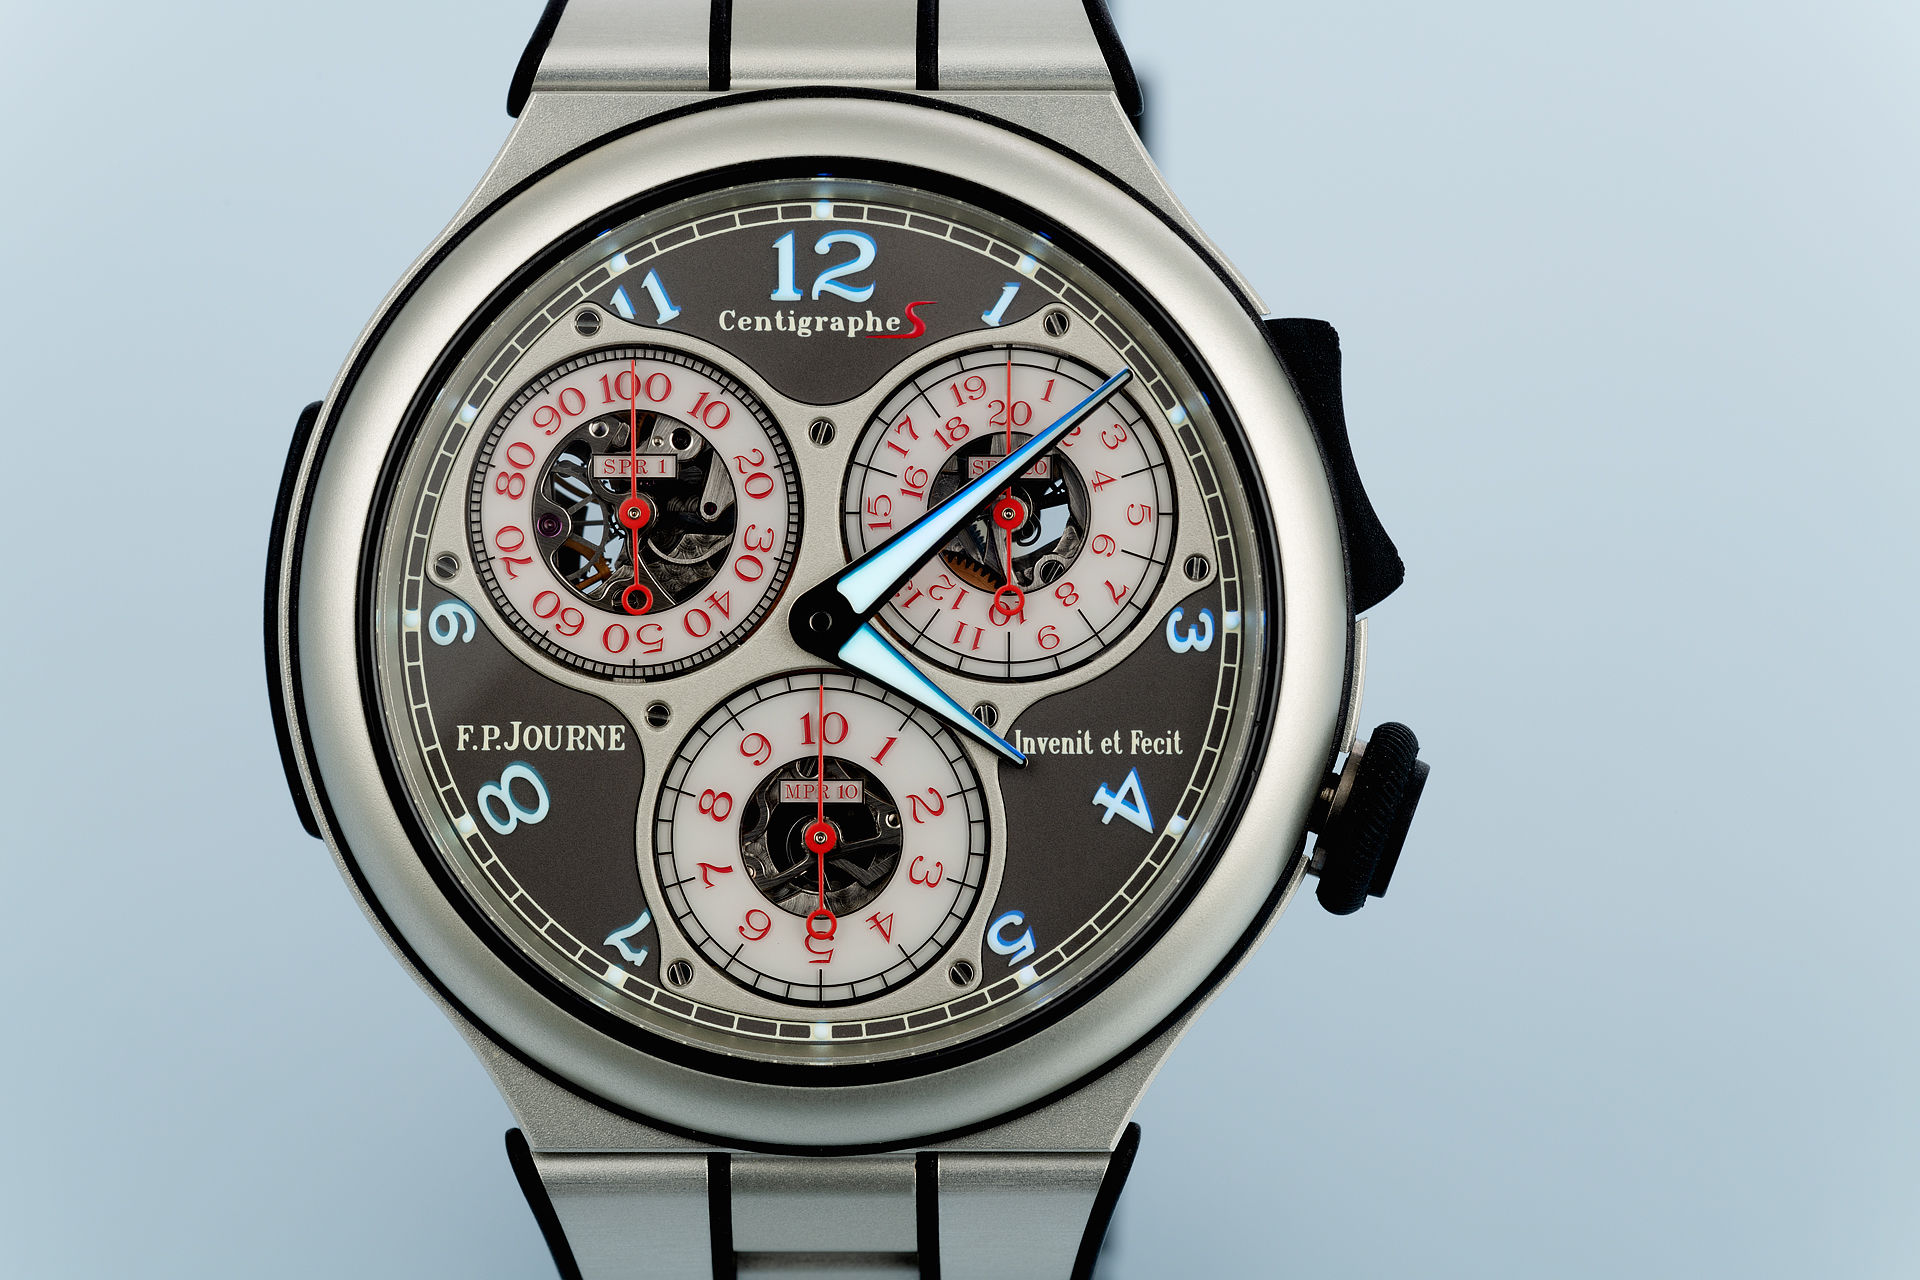  | Ultra Light '100th of a Second' | F. P. Journe Centigraph S